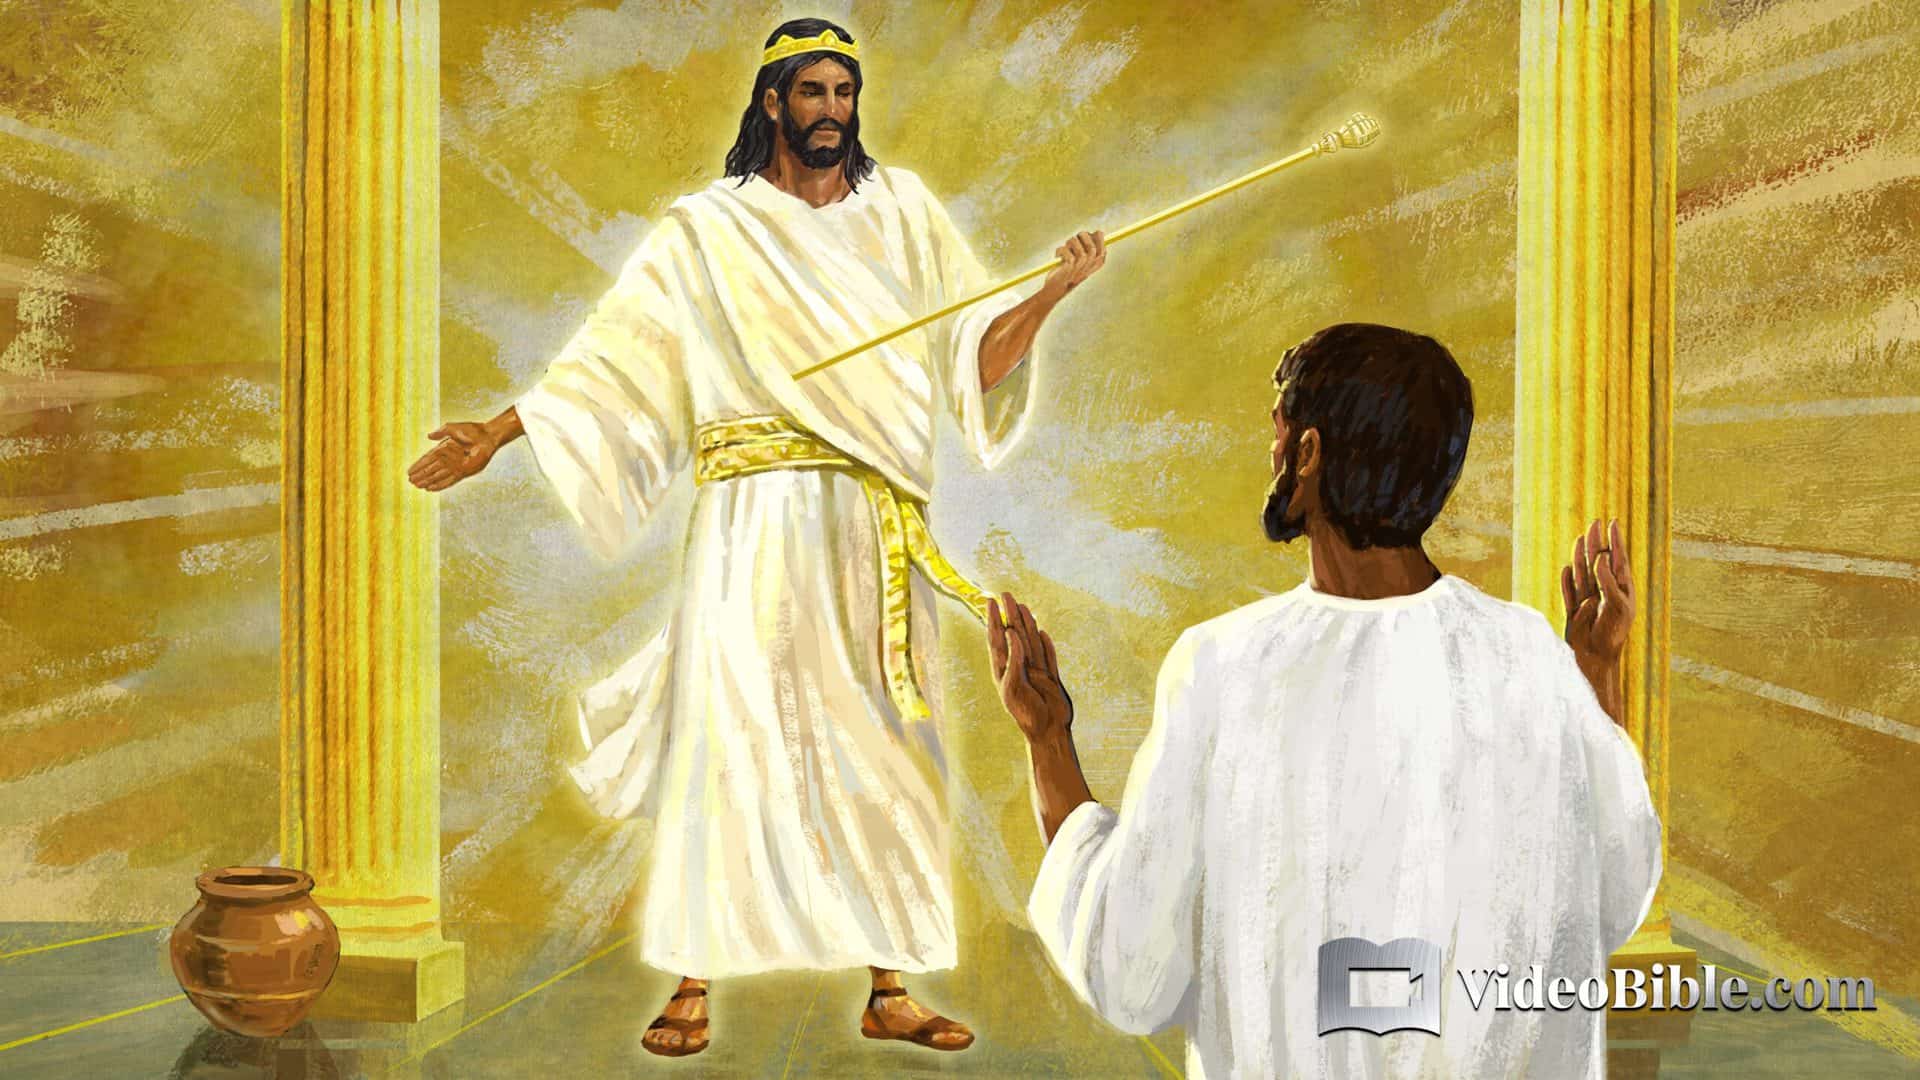 Jesus presenting a golden scepter to victorious man who does God's will